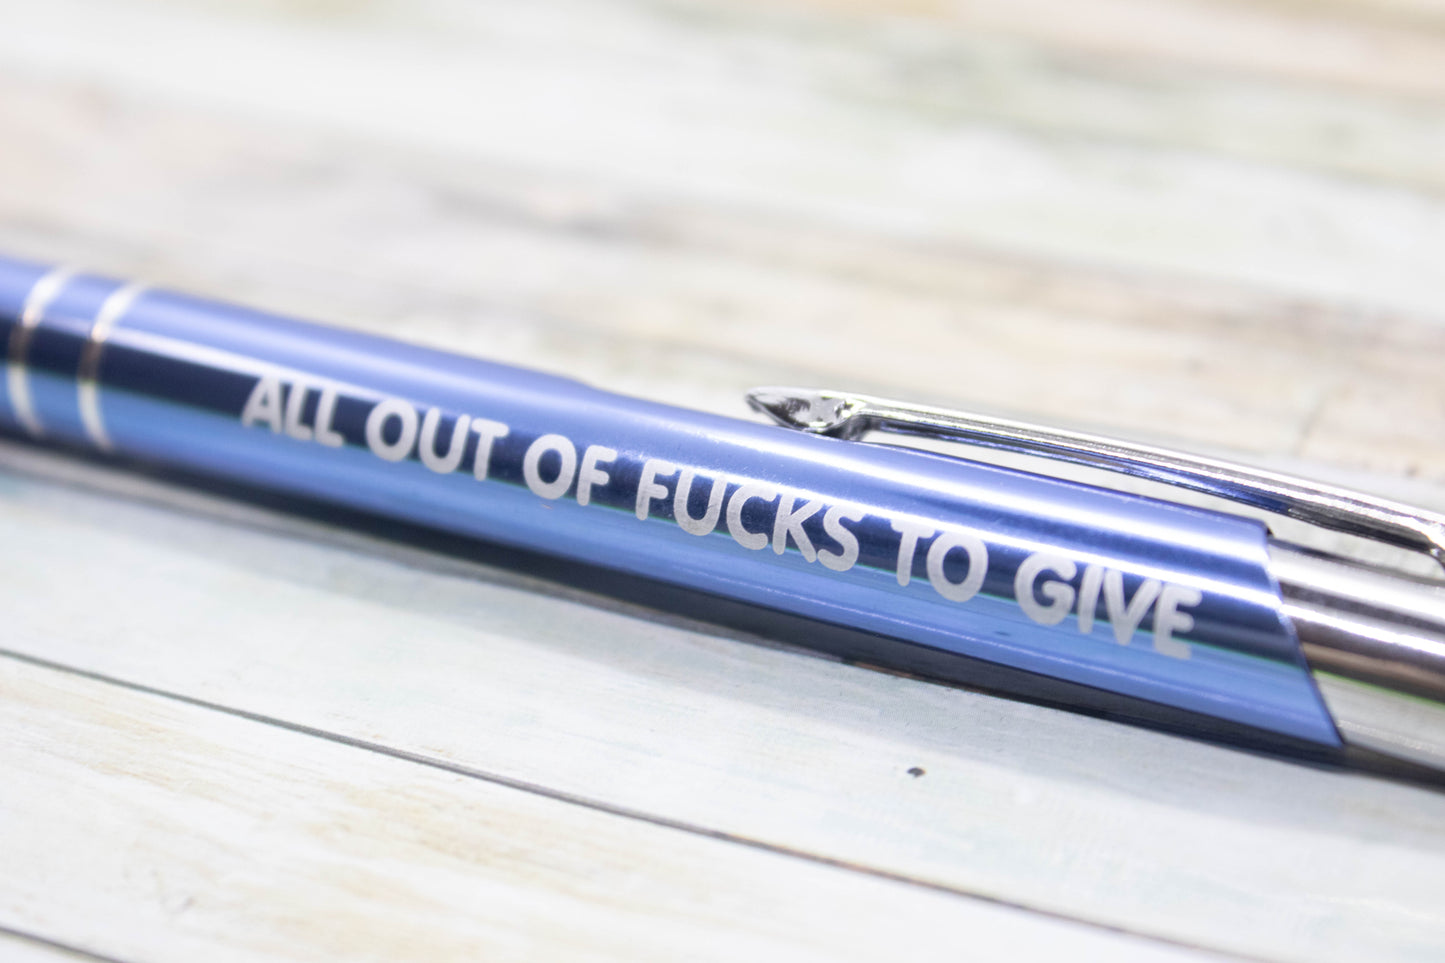 All Out Of Fucks To Give Pen